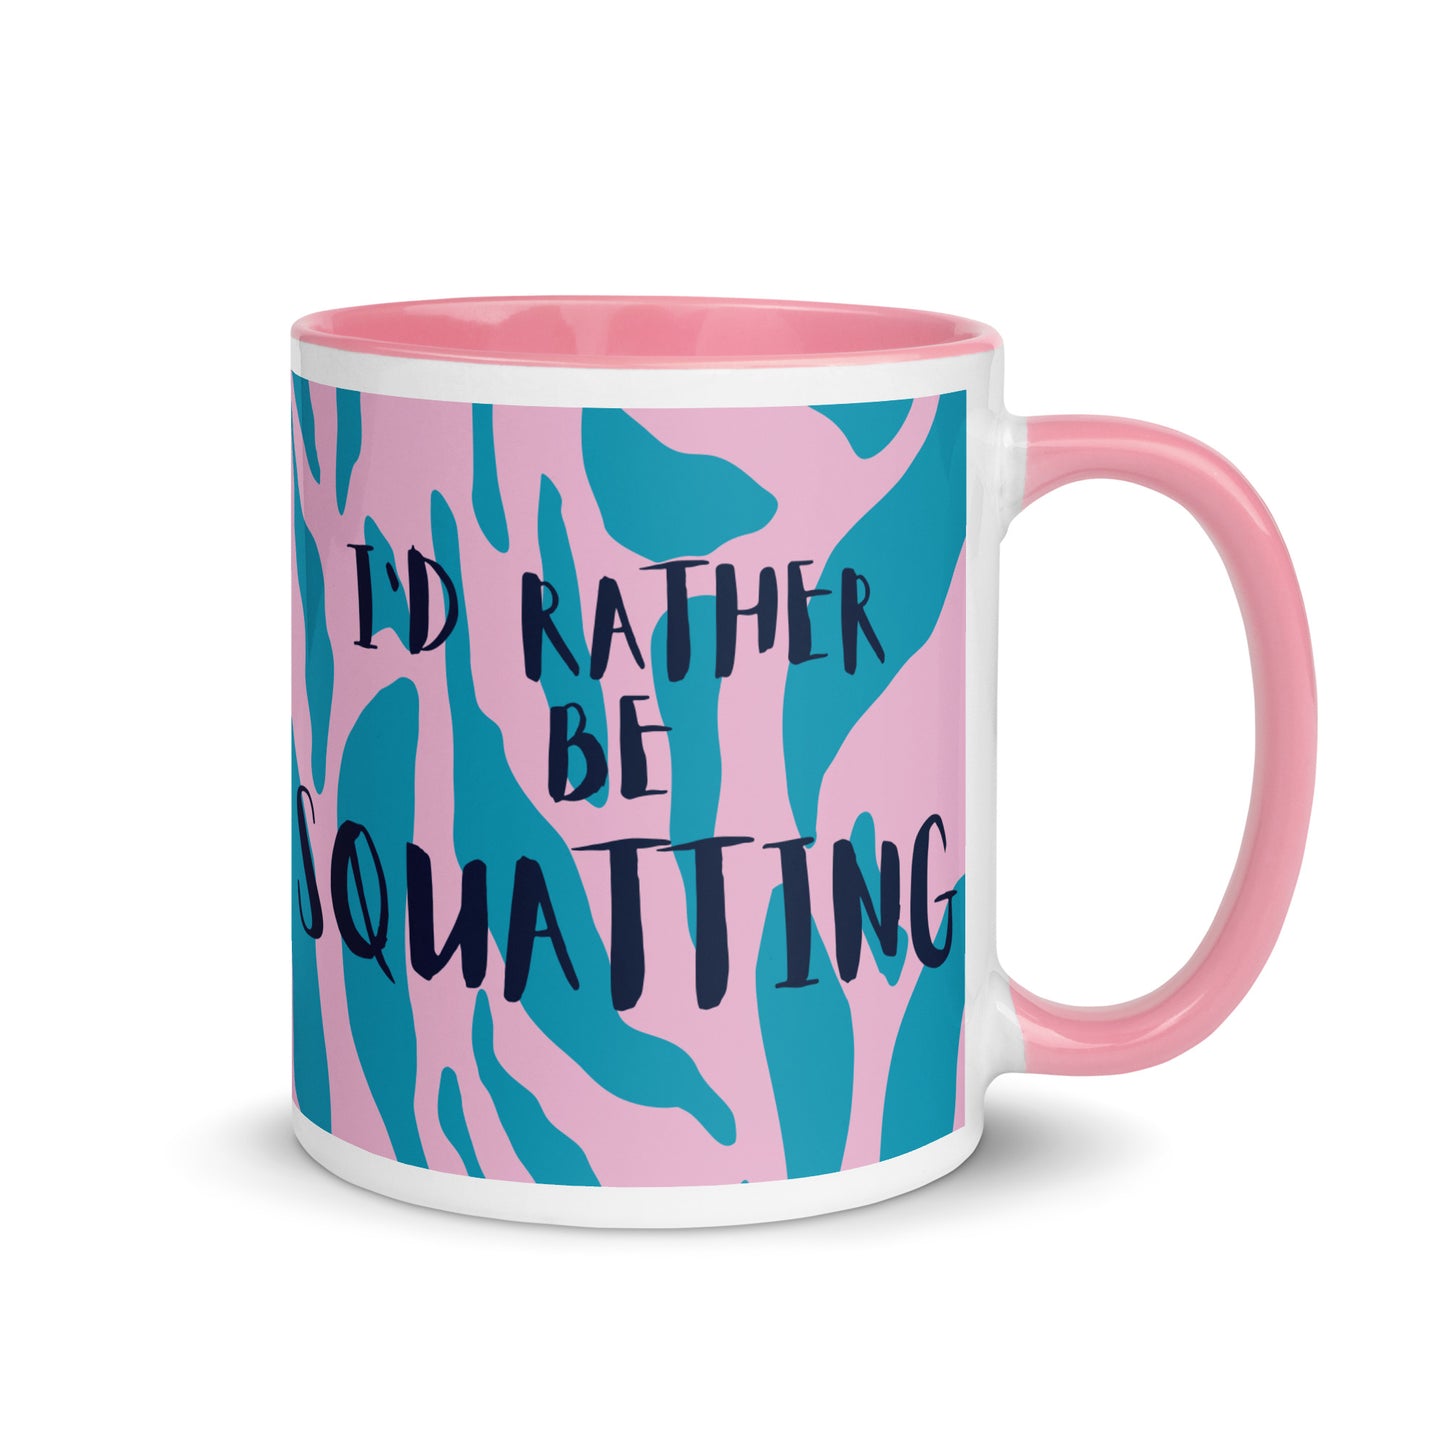 Blue and pink animal print mug with the words  I'd rather be squatting. A gift for people who love squatting at the gym